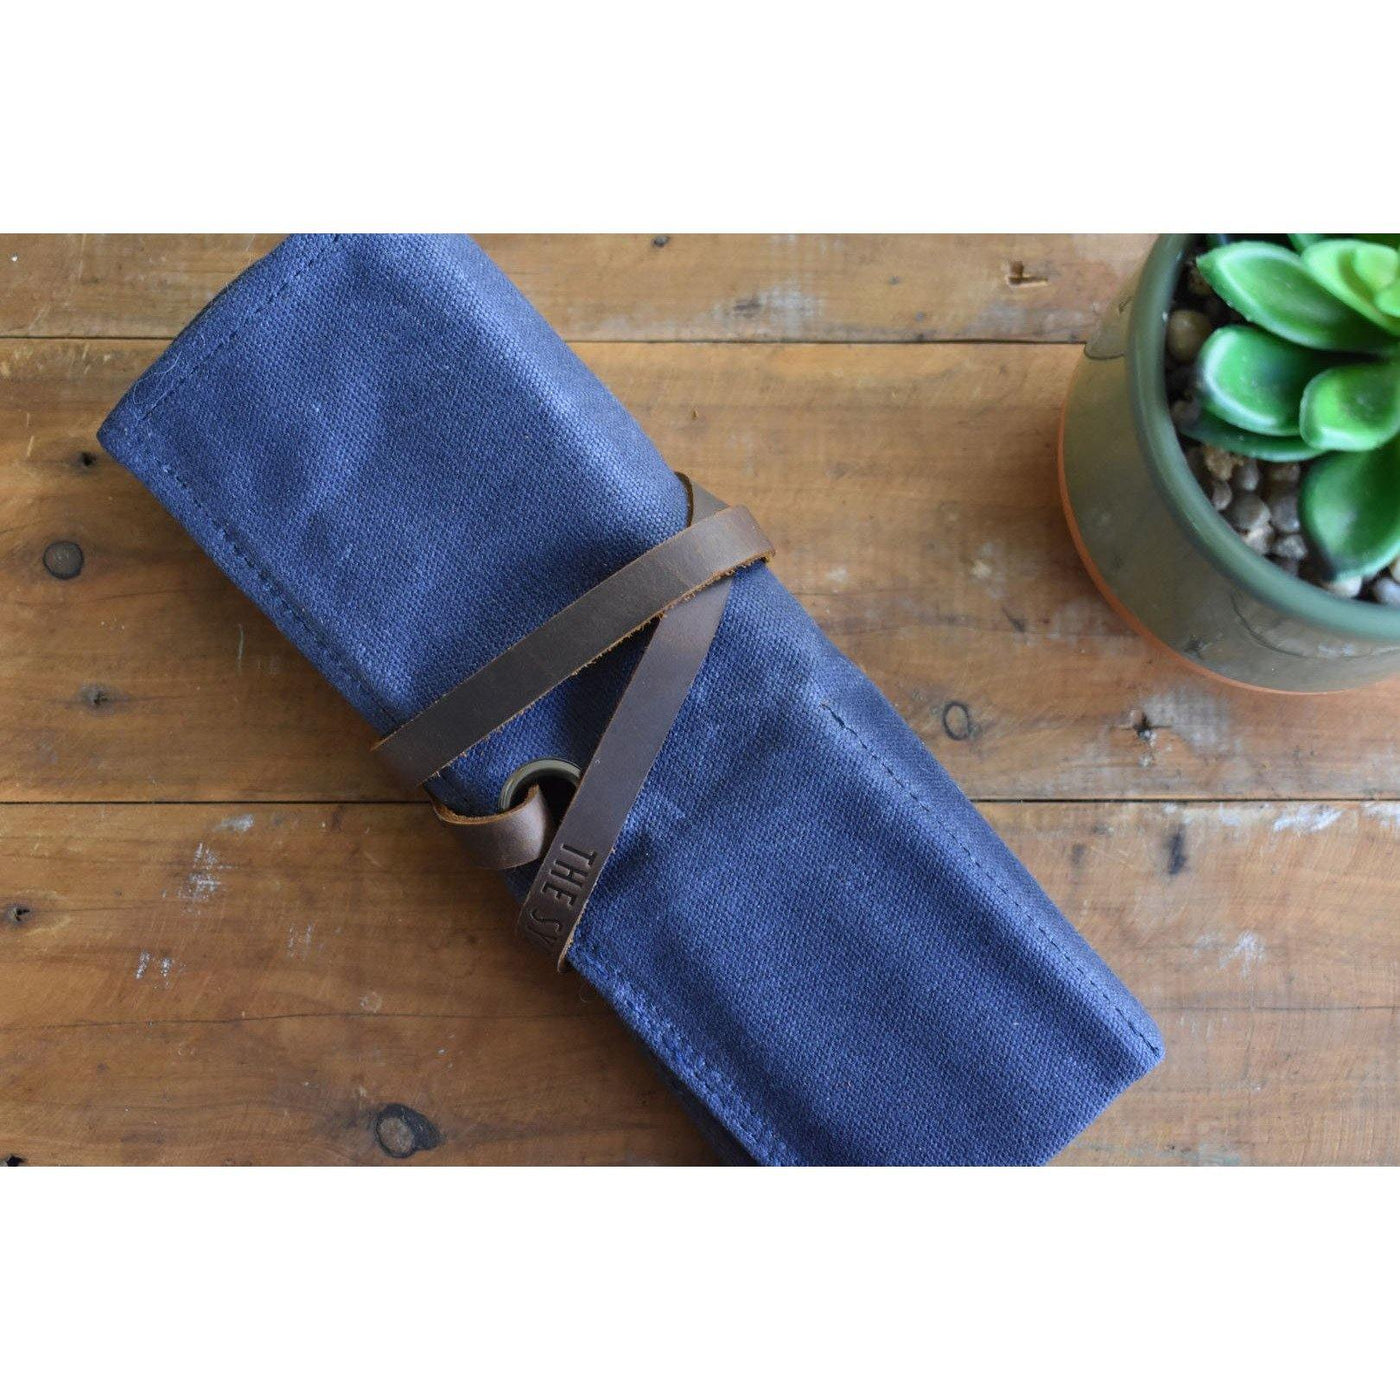 Navy & Taupe Waxed Canvas & Velvet Watch Roll - Four Slots - The Sydney Strap Co.